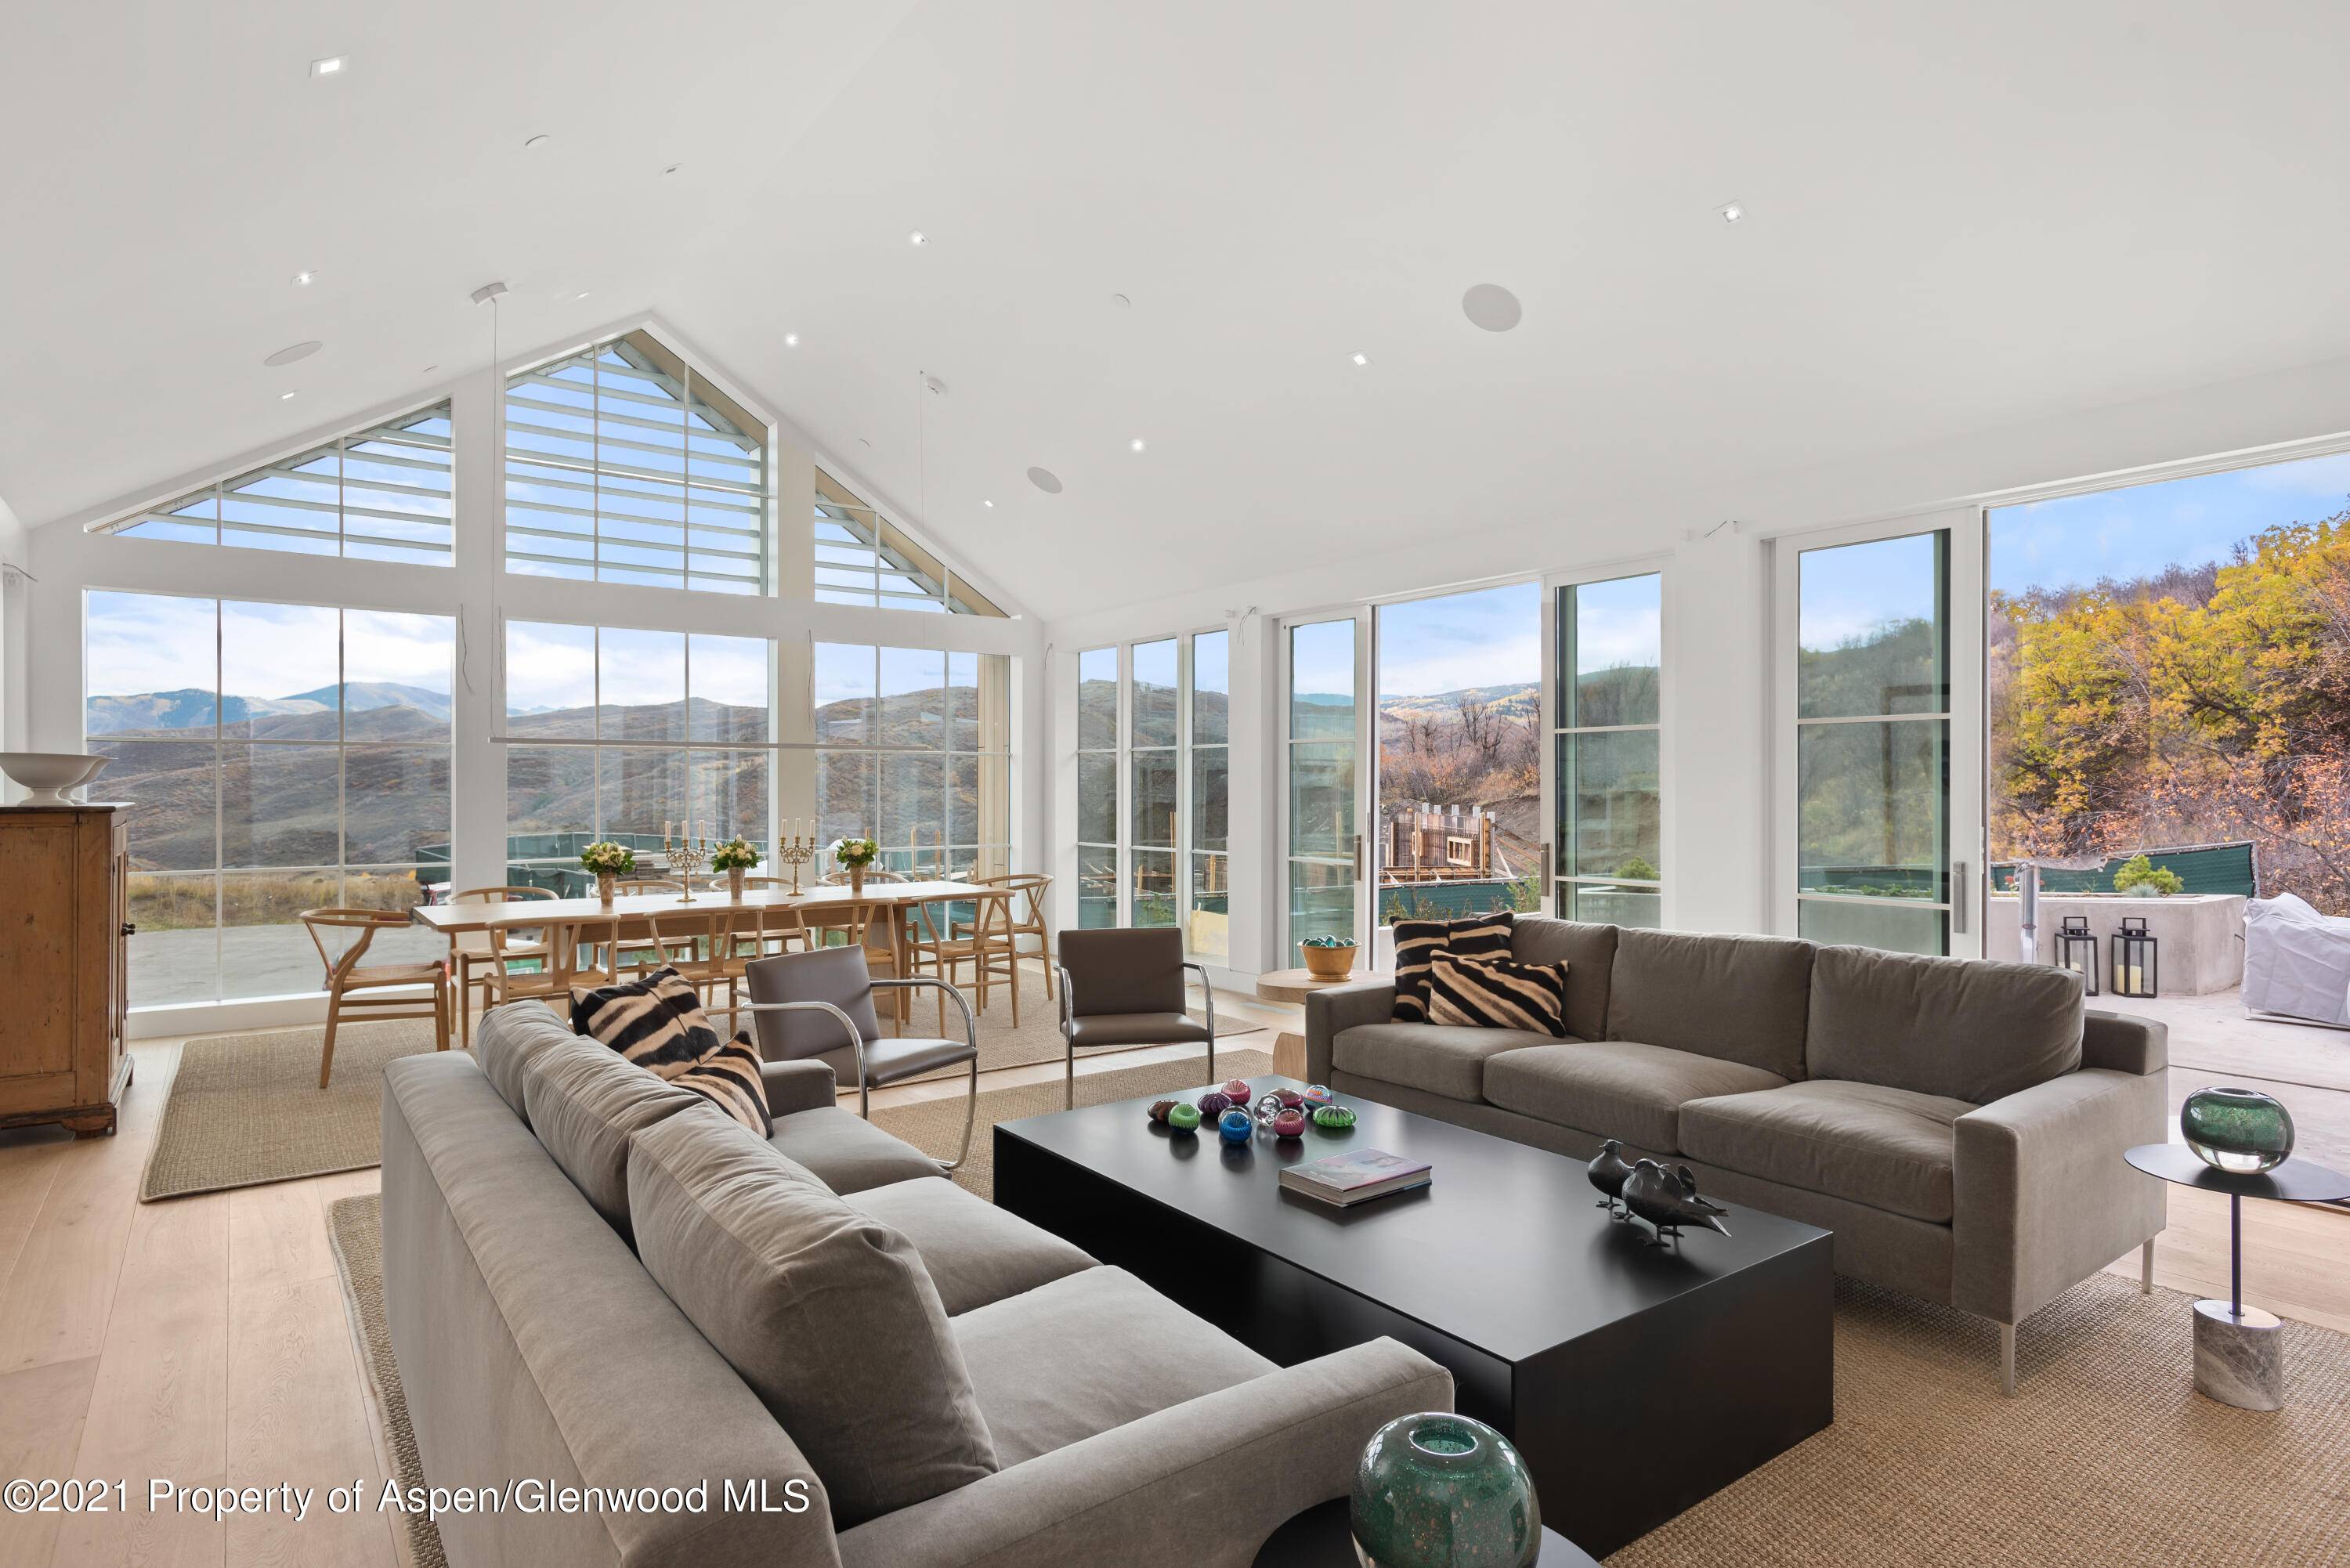 This beautifully appointed home, which was featured in 'Colorado Homes and Lifestyles', is the perfect getaway for an Aspen Snowmass experience, in winter or summer.